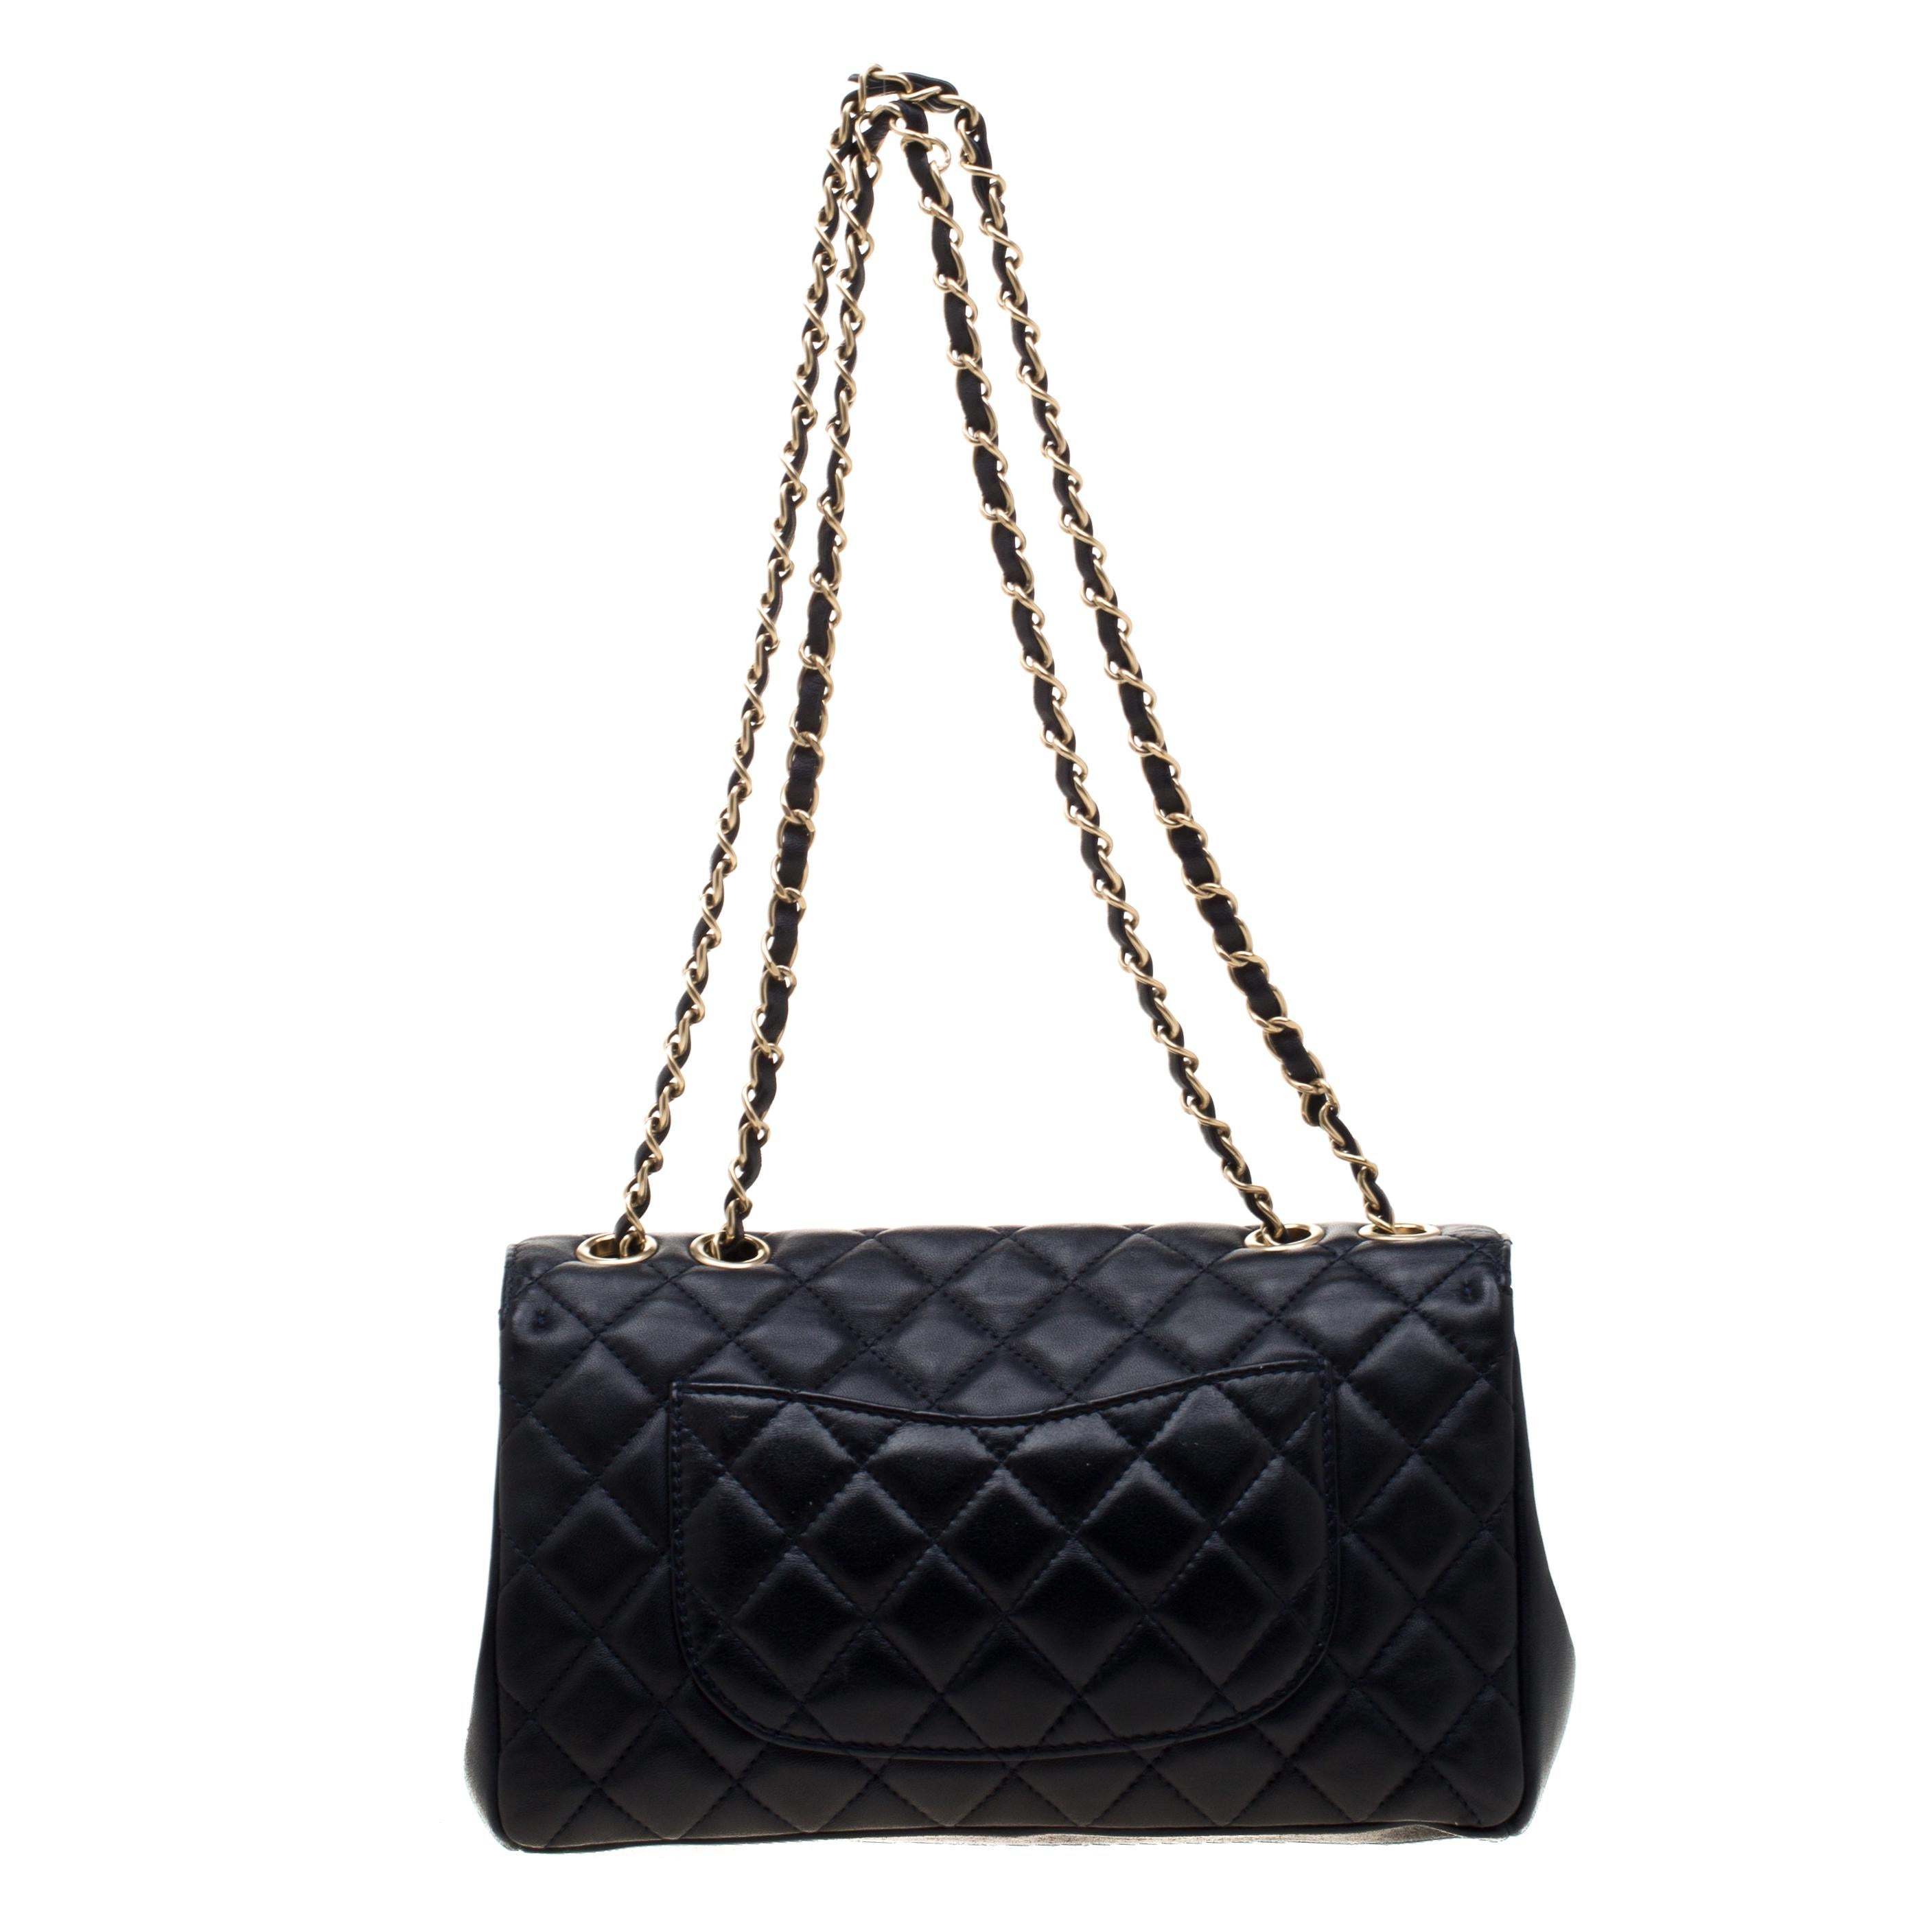 Masterfully crafted from quality leather, this shoulder bag from Chanel will effortlessly hold your essentials. It is covered in the brand's signature quilt and on the flap, the Mademoiselle lock sits beautifully. Created with luxury in mind, this